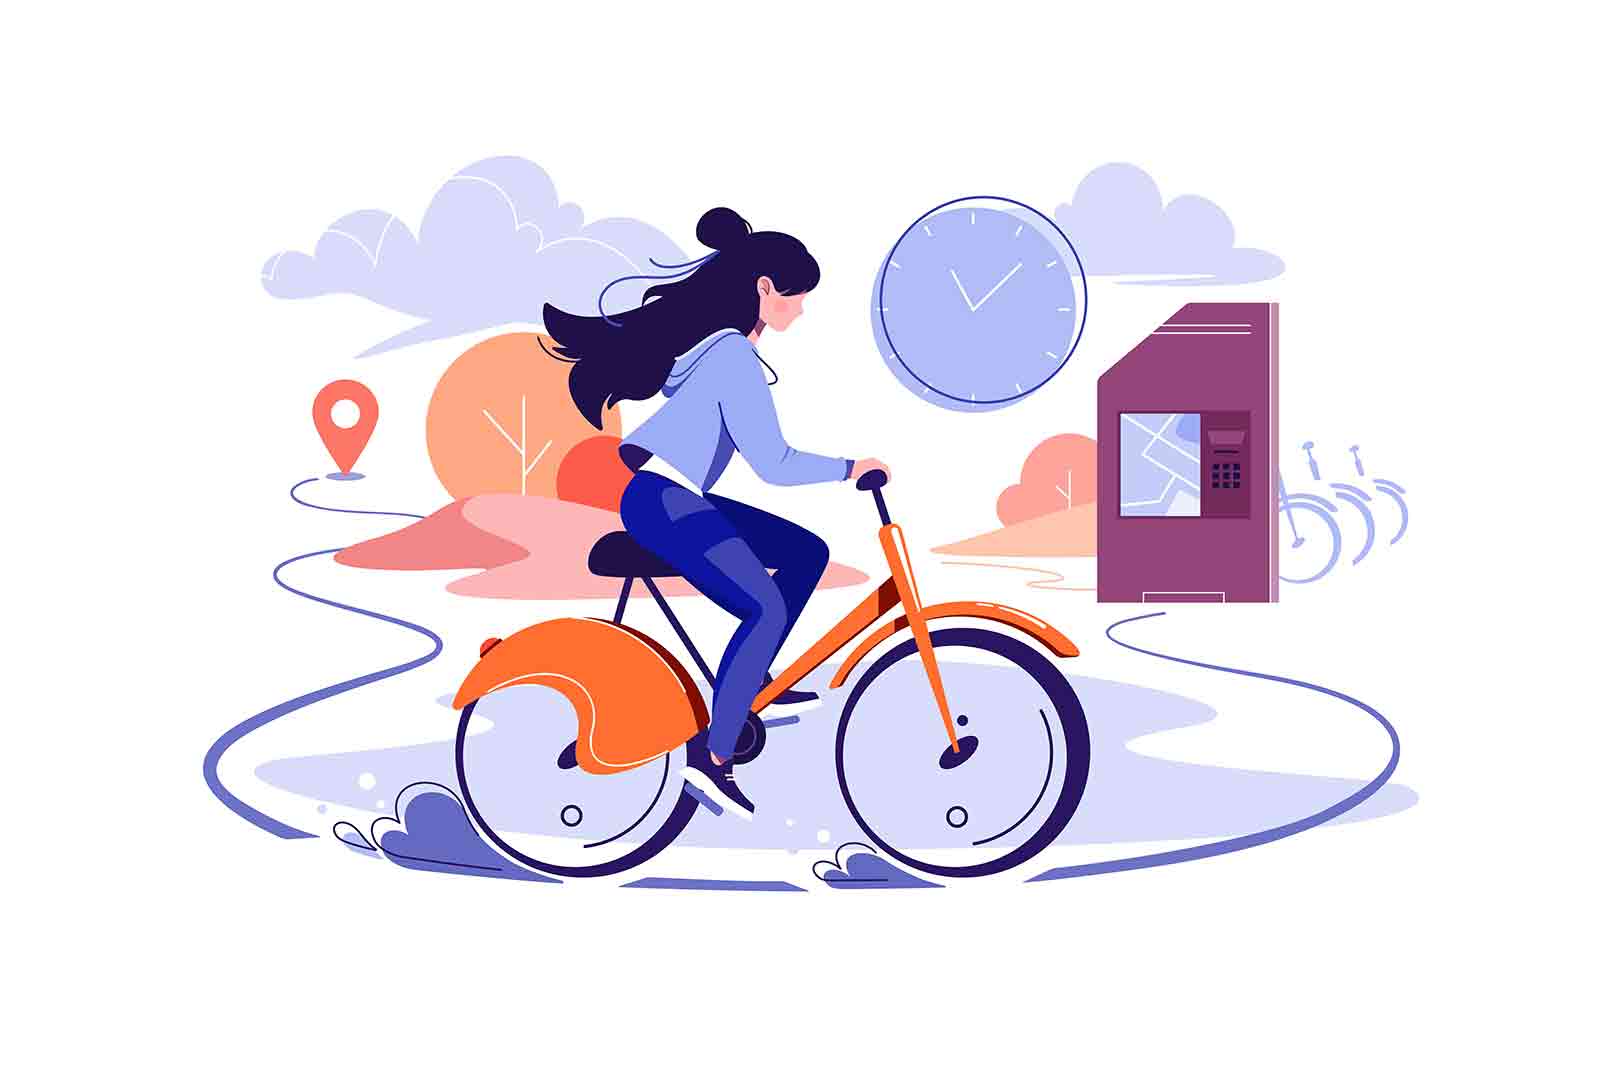 Public city bicycle rental business vector illustration. Woman riding on bike on road flat style. Active leisure, sport, weekend concept